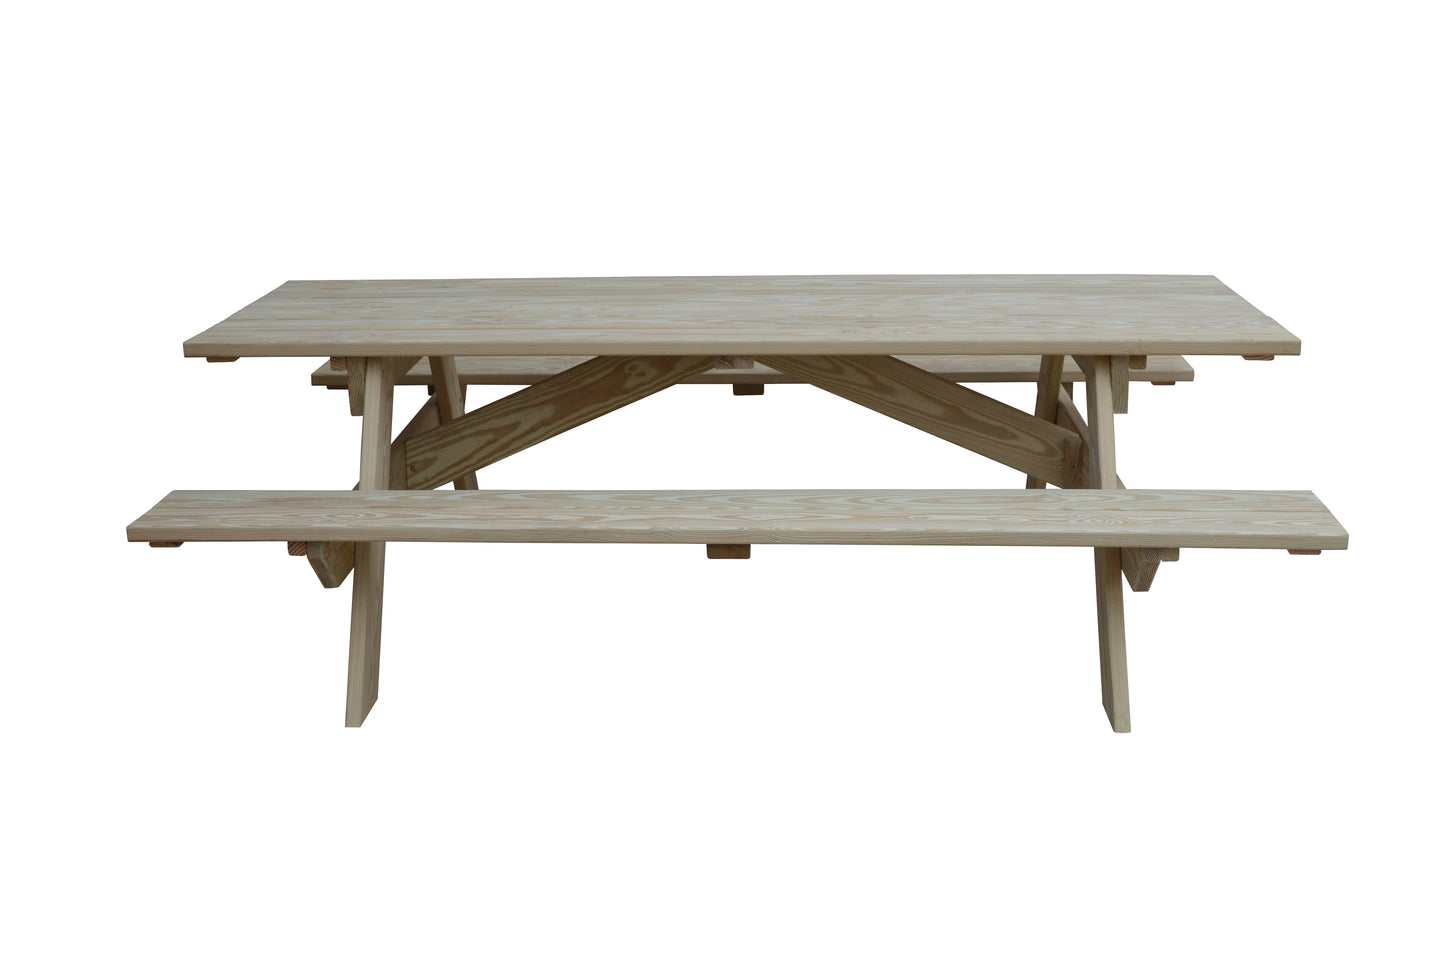 A&L Furniture Co. Pressure Treated Pine 8' Heavy Duty Park Picnic Table - Specify for FREE 2" Umbrella Hole - LEAD TIME TO SHIP 10 BUSINESS DAYS